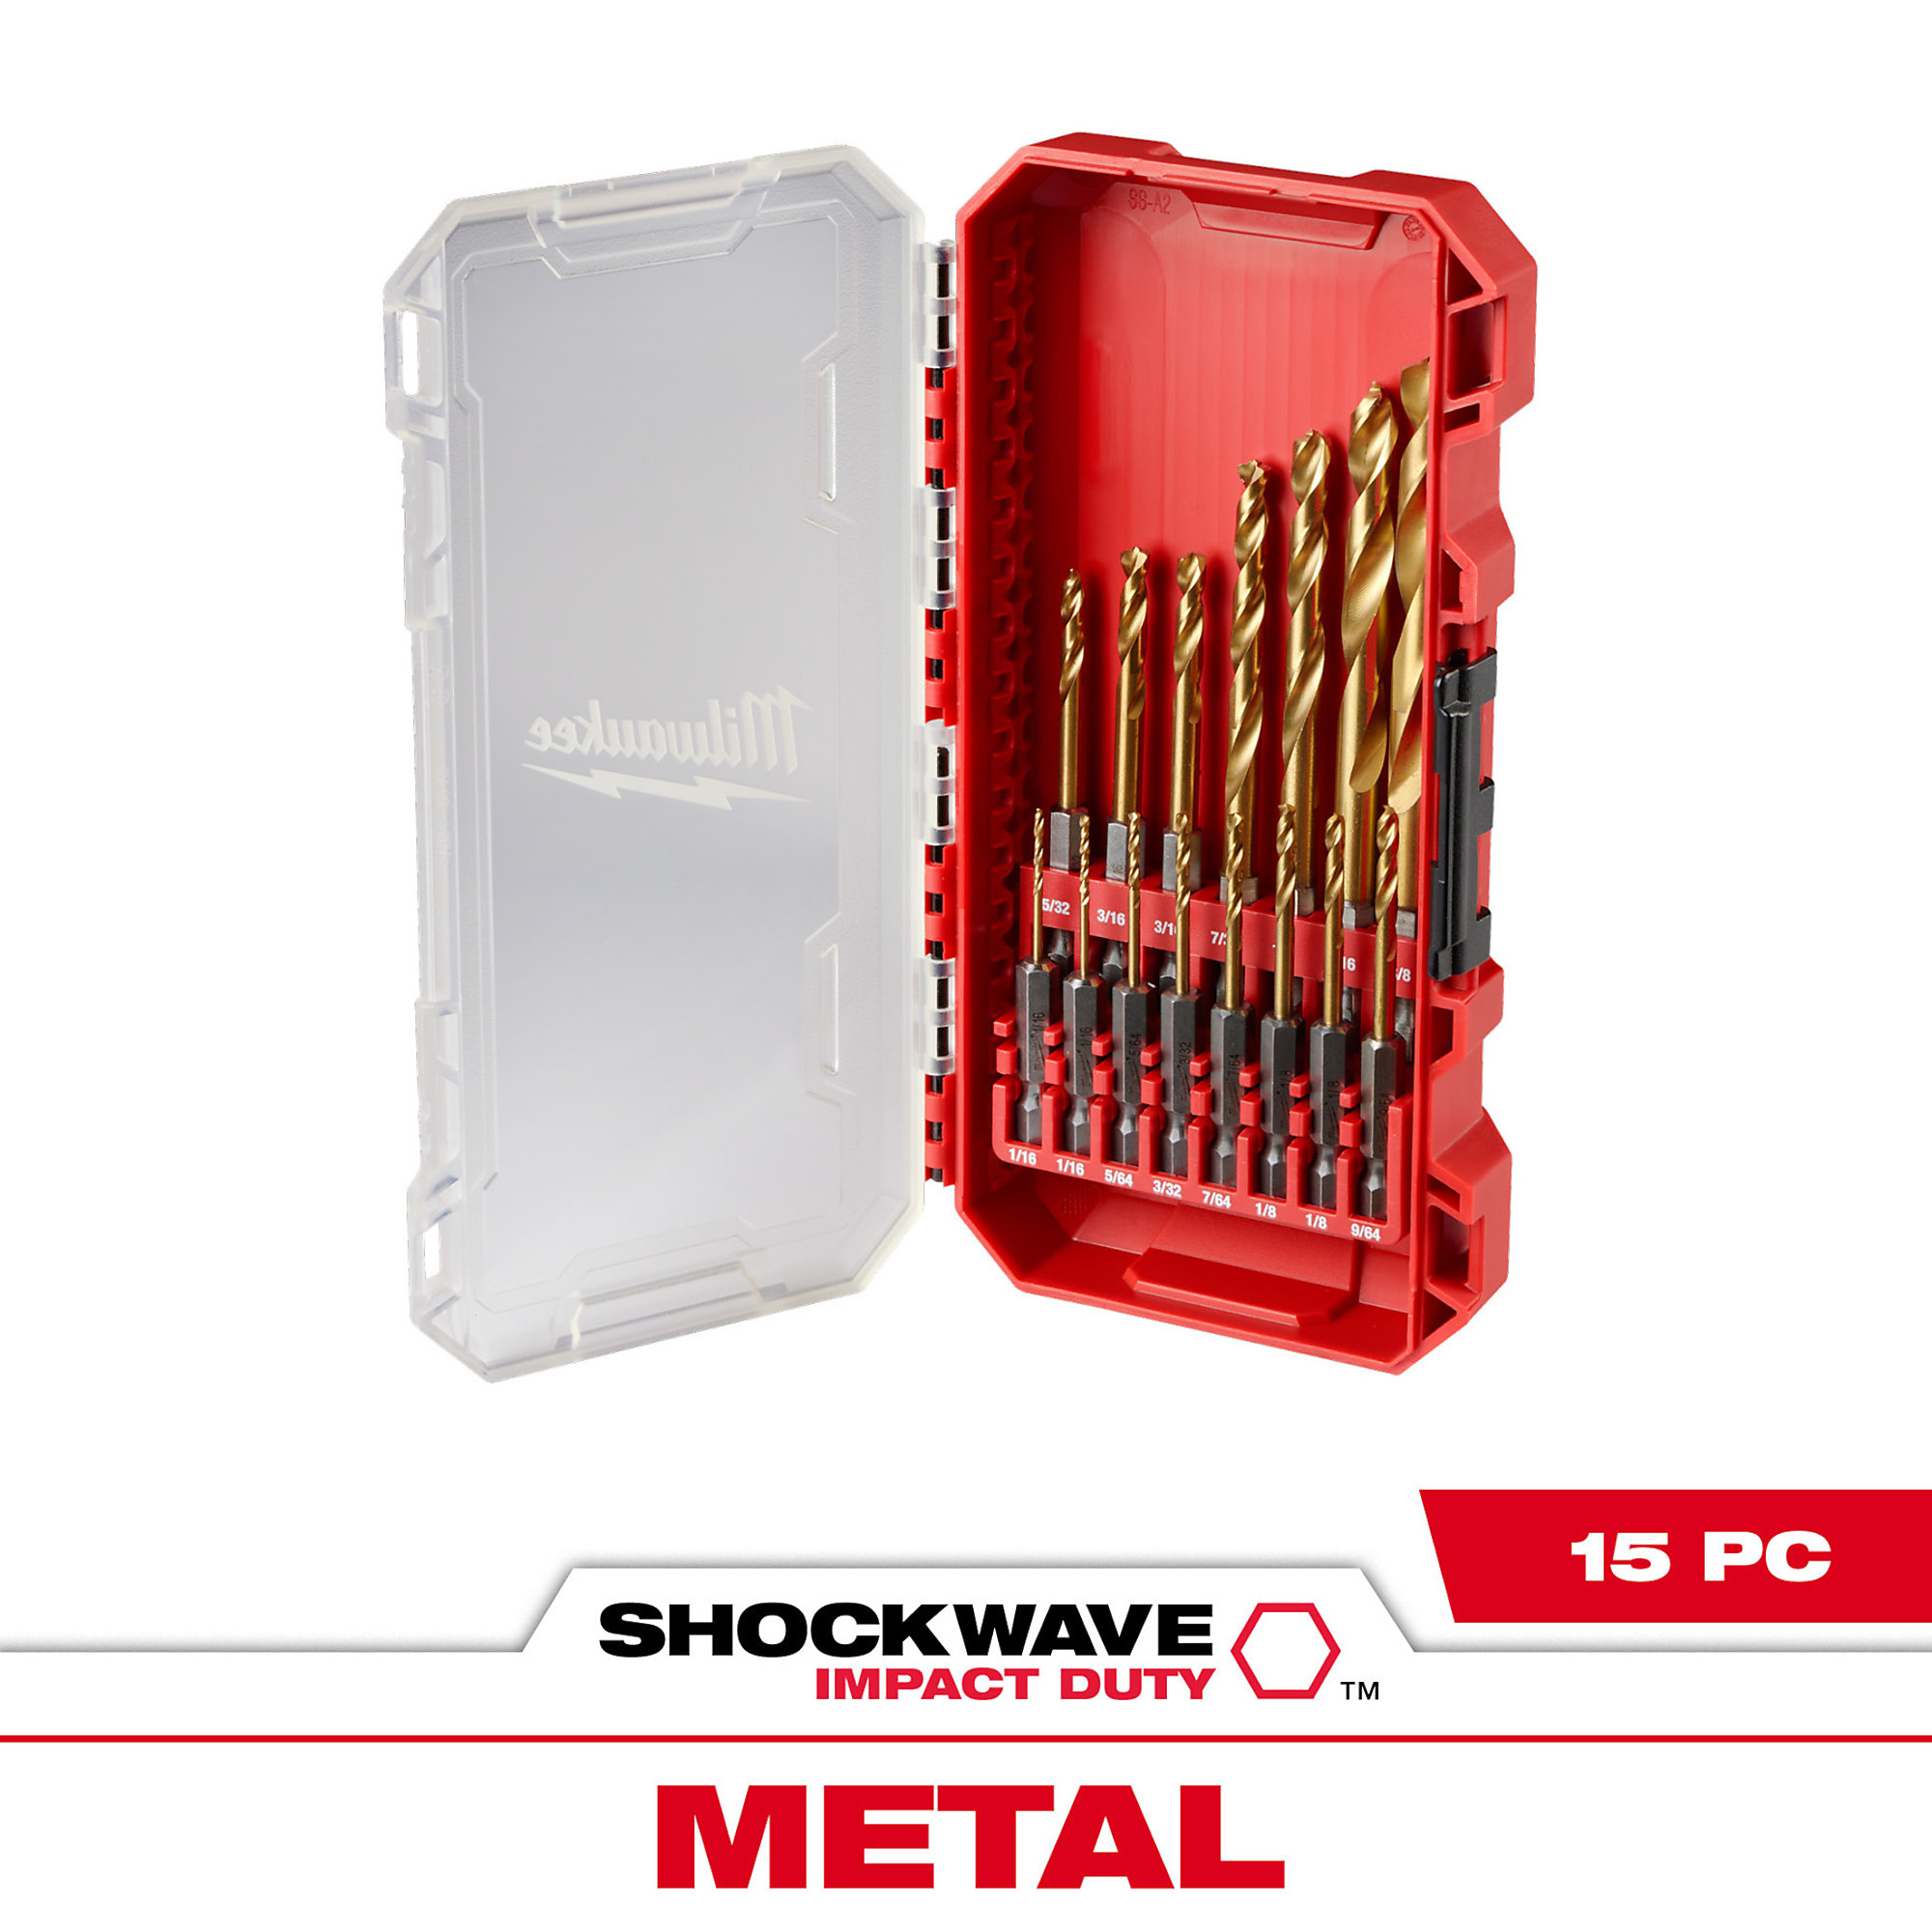 Milwaukee, SHOCKWAVE RED HELIX Titanium Drill Bit Set 15PC, Size (SAE) 1/4 in, Included (qty.) 15 Model 48-89-4670